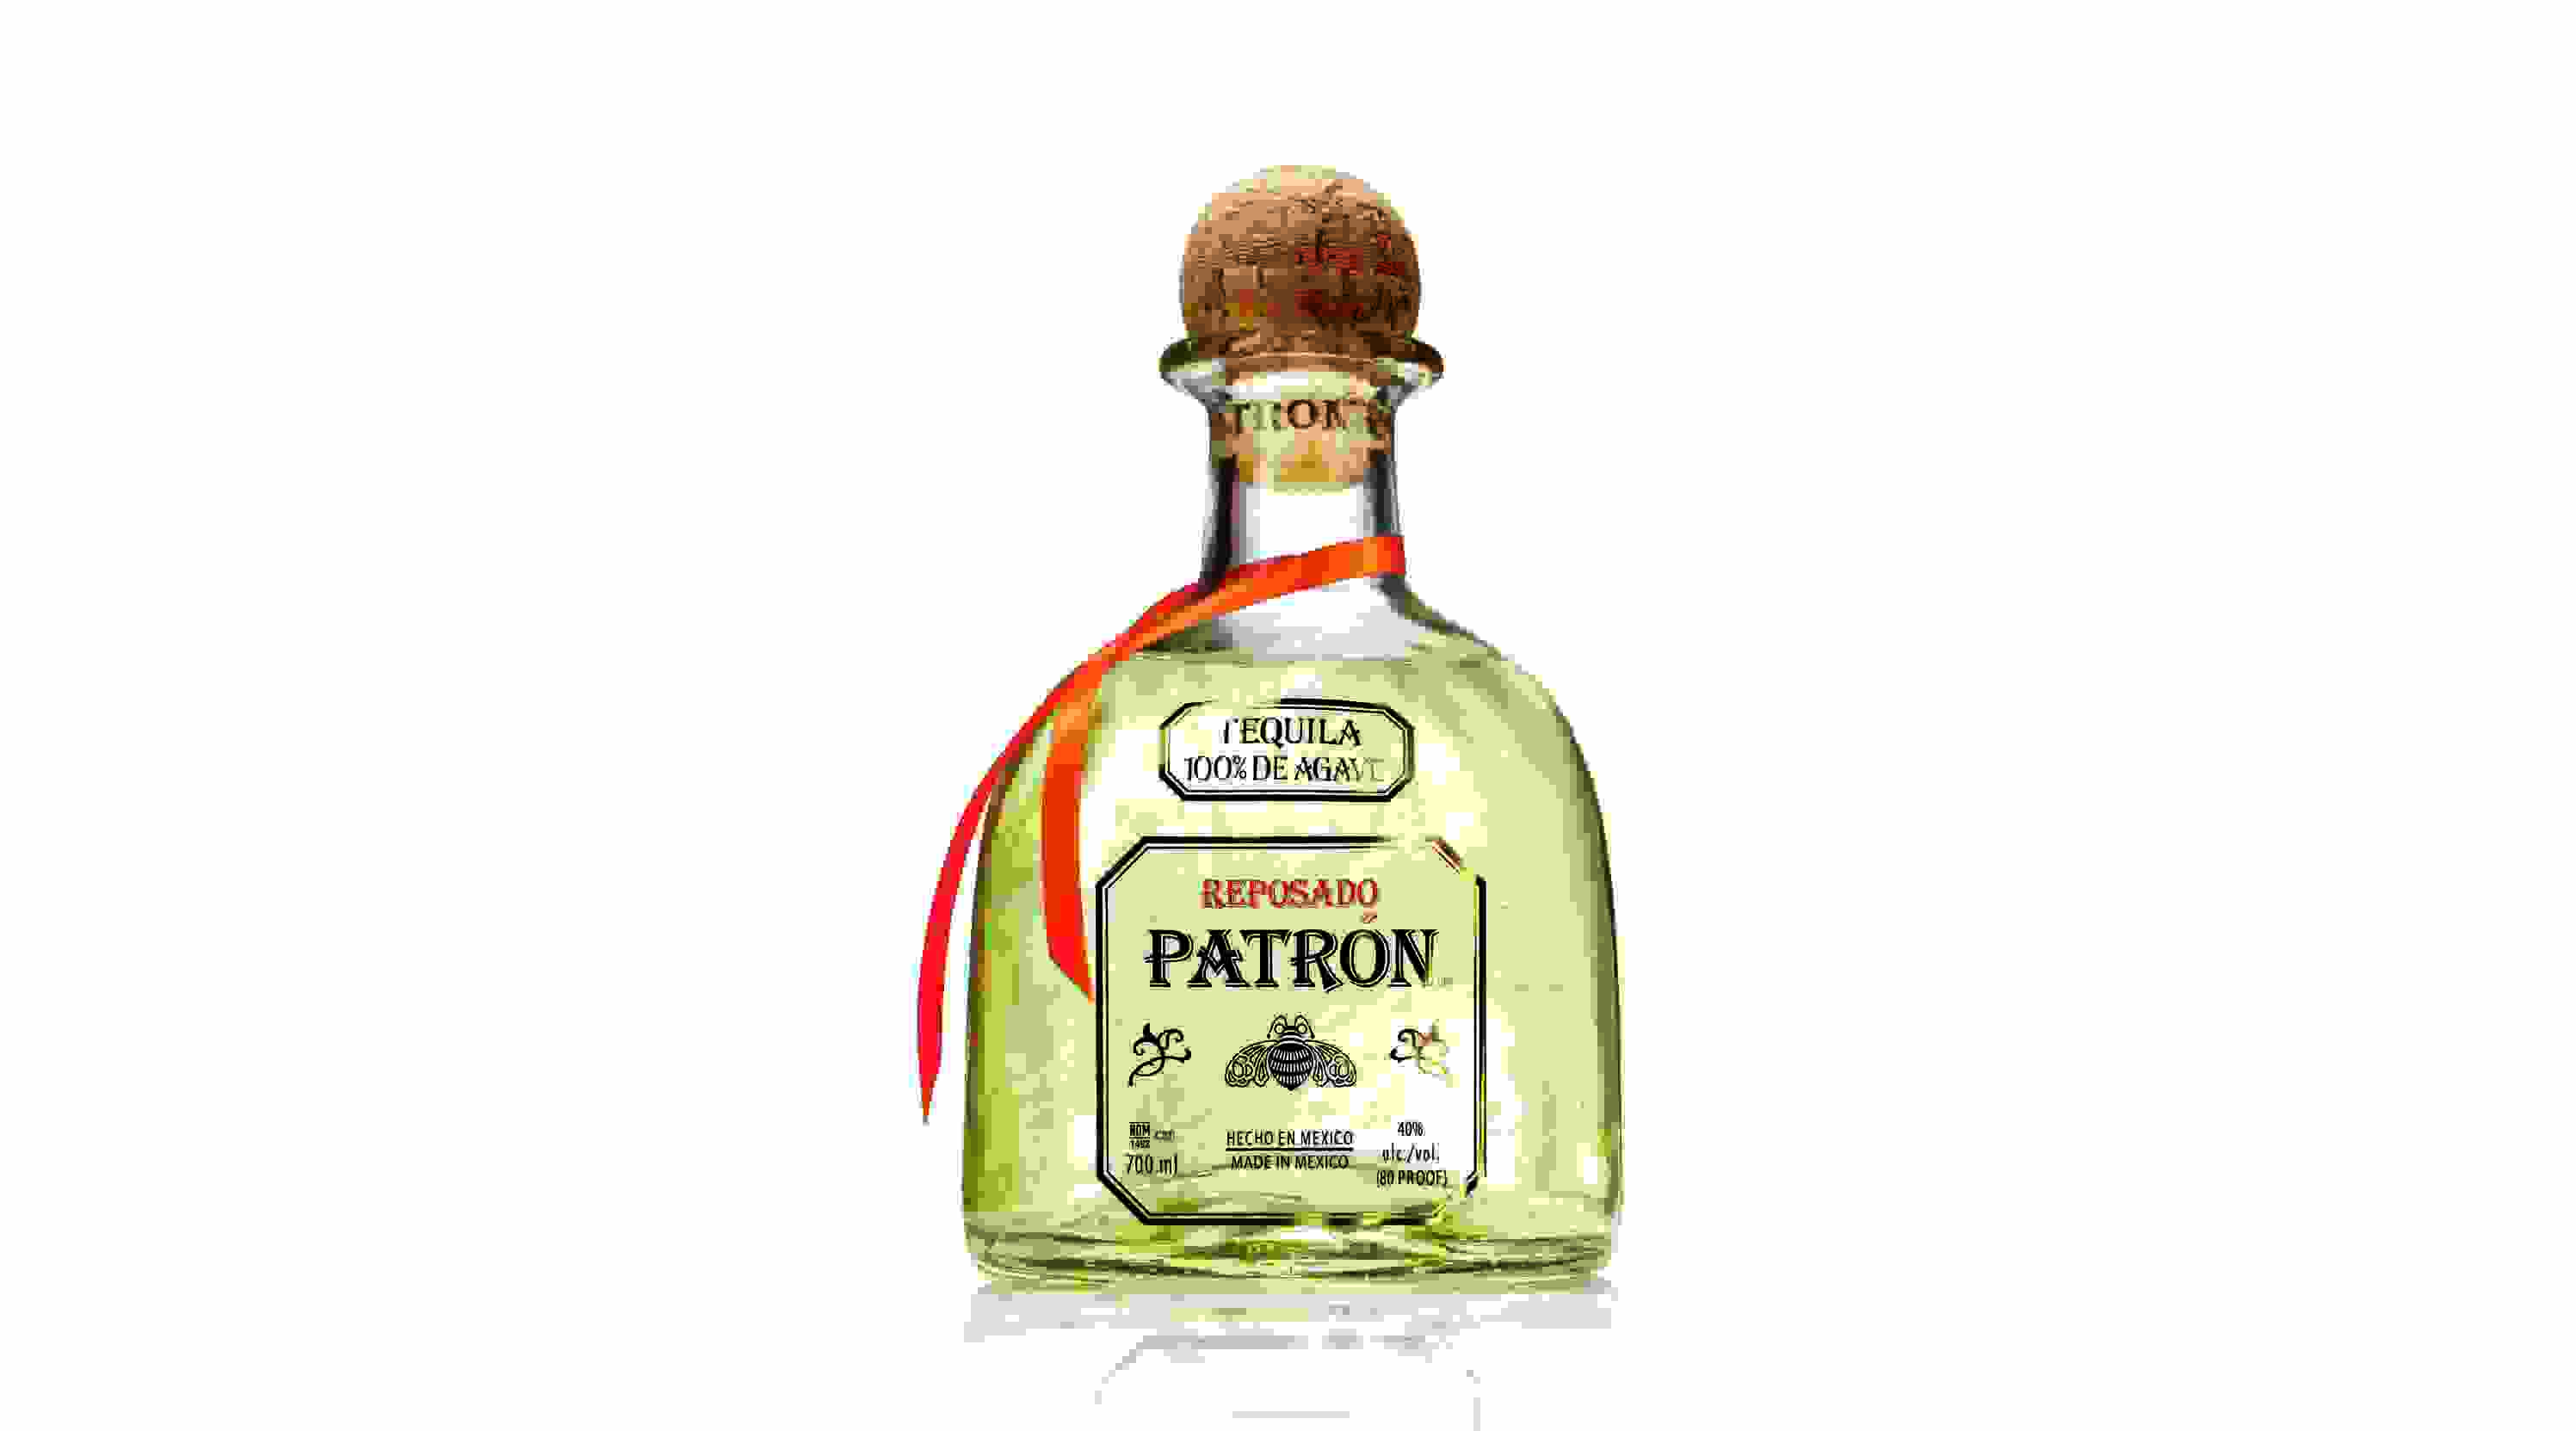 “Adding Patrón to the Bacardi portfolio creates a tremendous opportunity for the brand outside of the United States as Bacardi’s international distribution network will help grow Patrón around the world,” said incoming Bacardi Chief Executive Mahesh Madhavan.